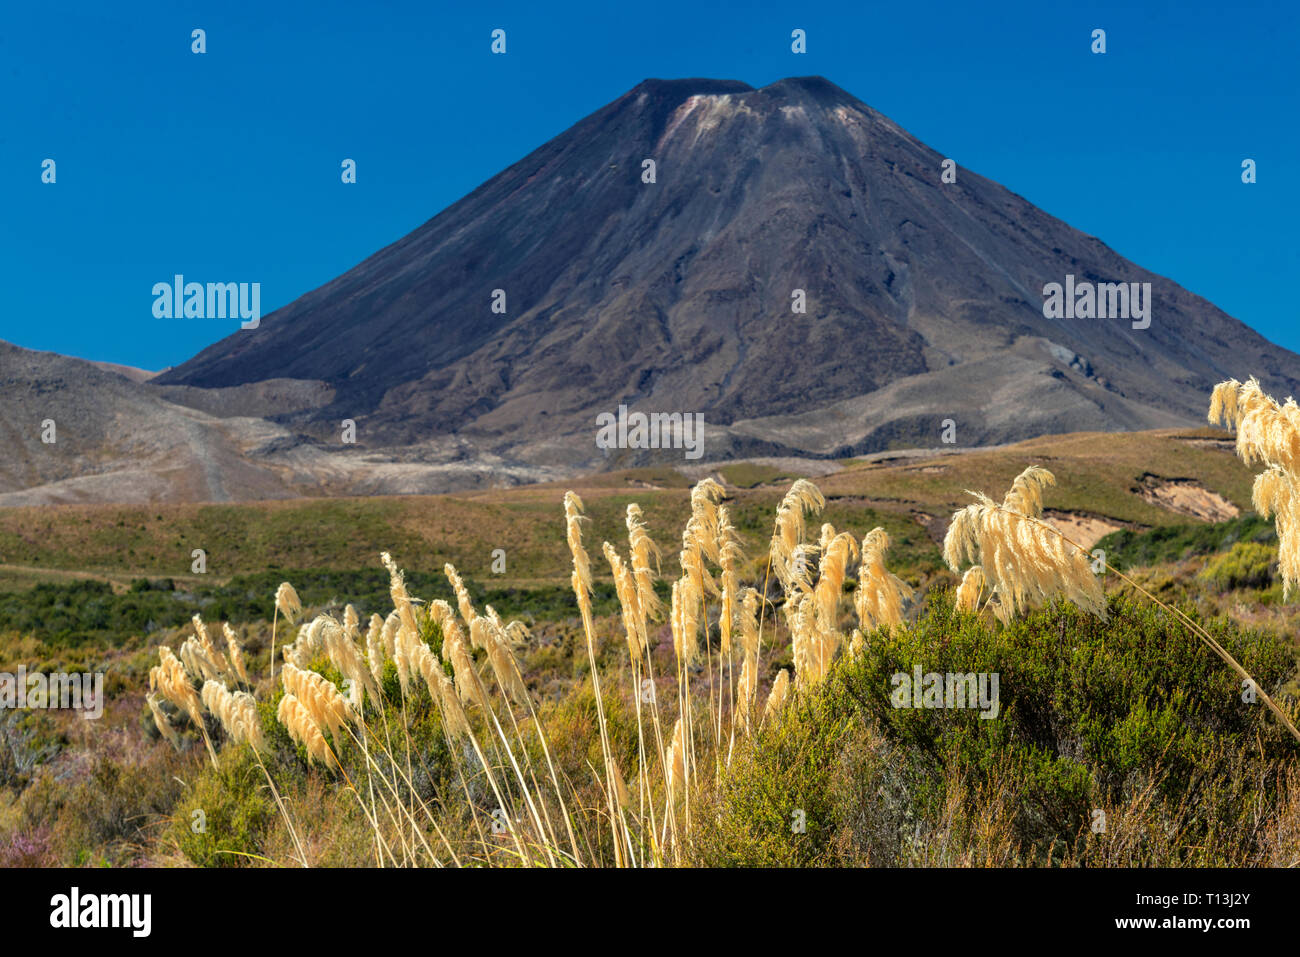 New Zealand's Mount Nguaruhoe, with native Toetoe, a type of Pampas grass, in the foreground. The volcano was Mt Doom in Lord of the Rings. Stock Photo